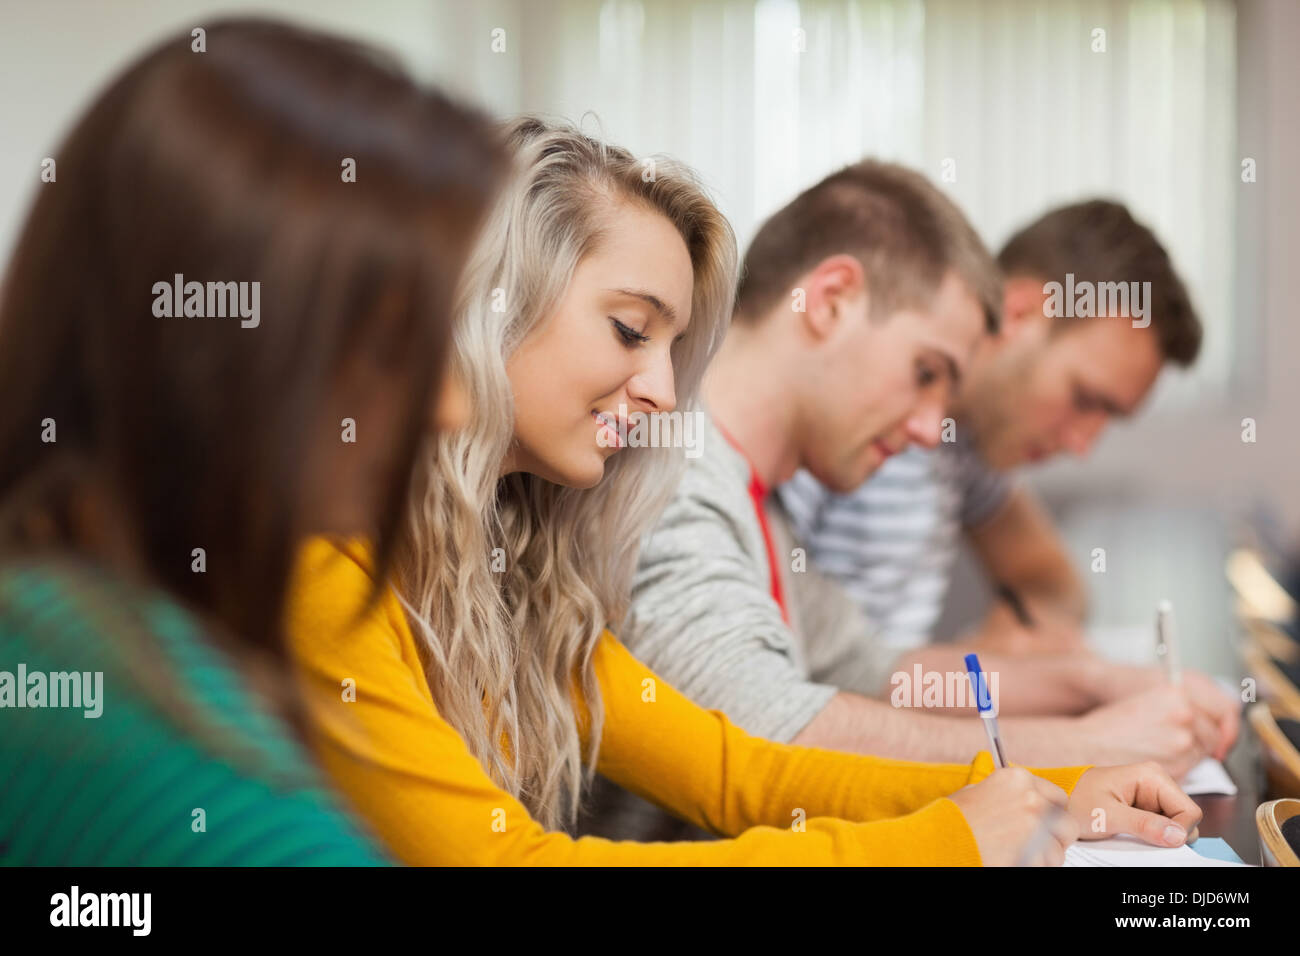 Focused casual students having an exam Stock Photo